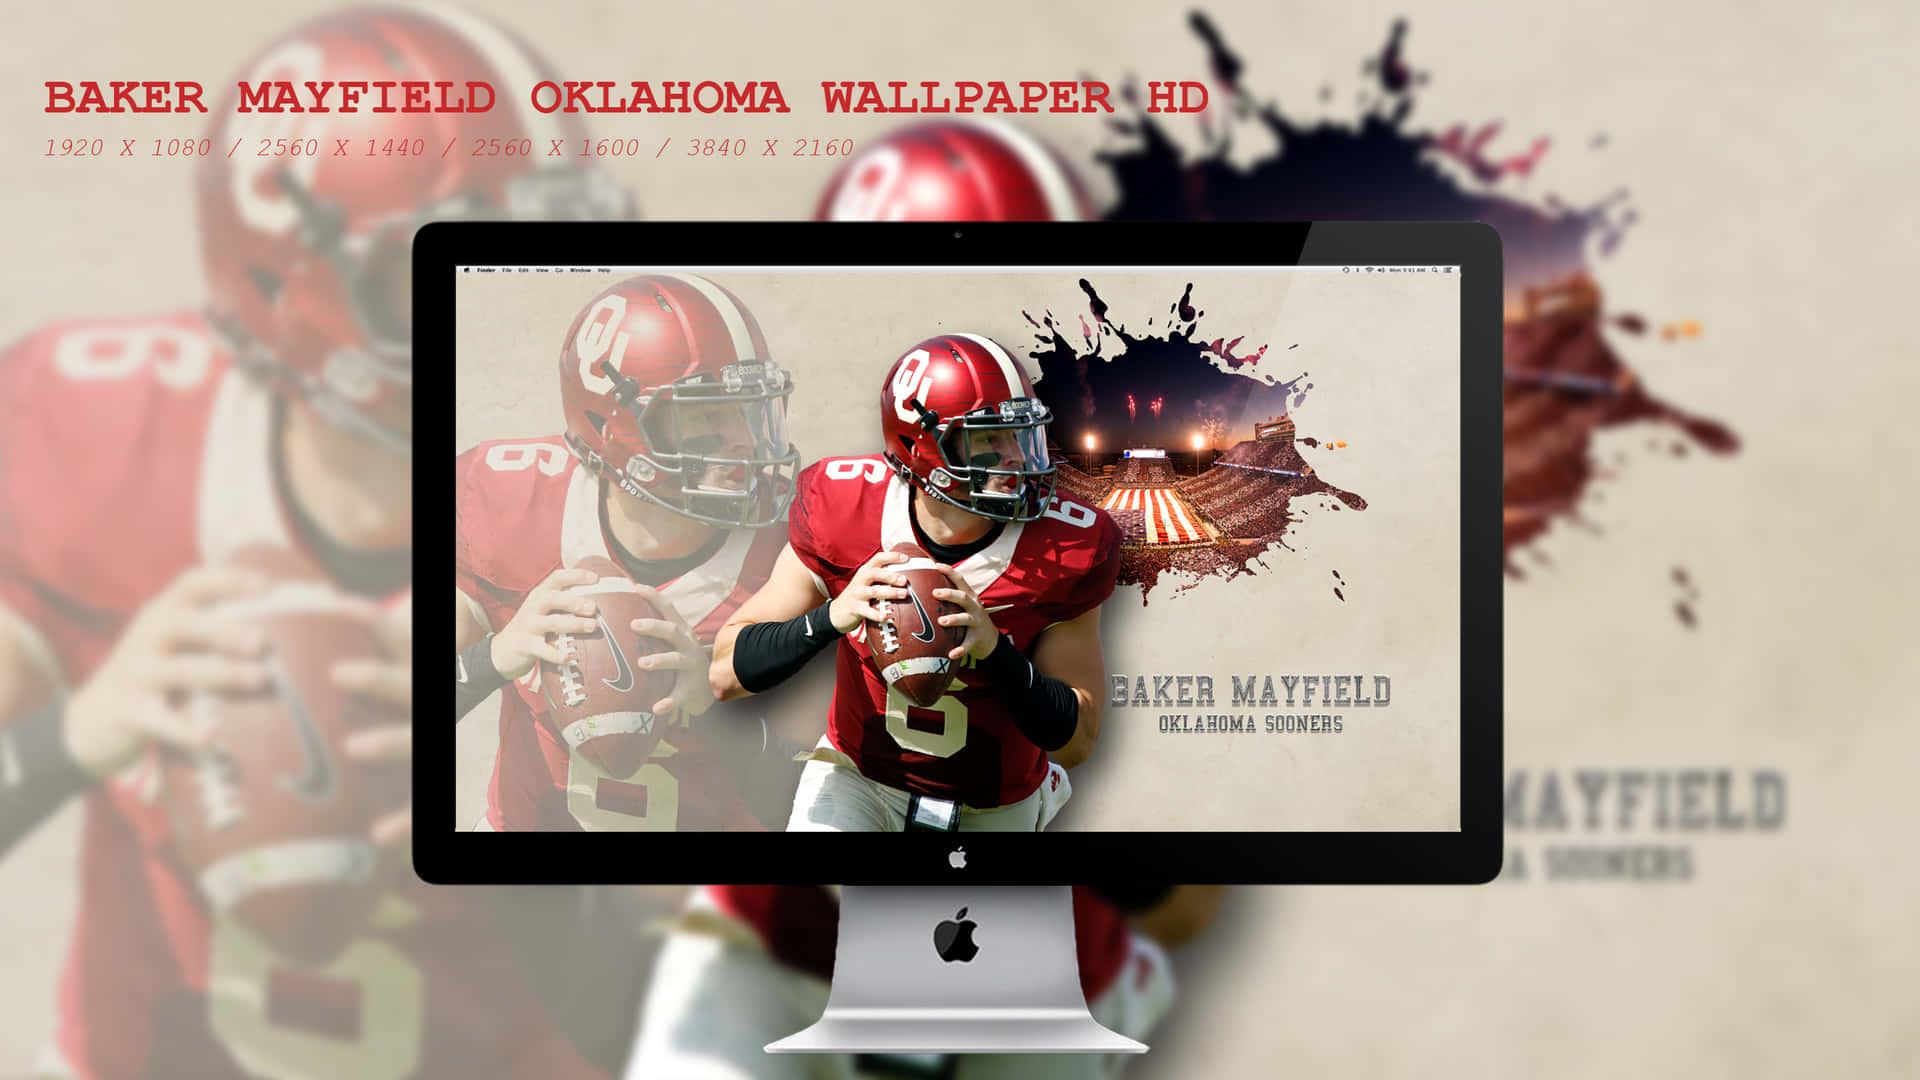 Baker Mayfield showing his leadership as the Browns starting quarterback Wallpaper